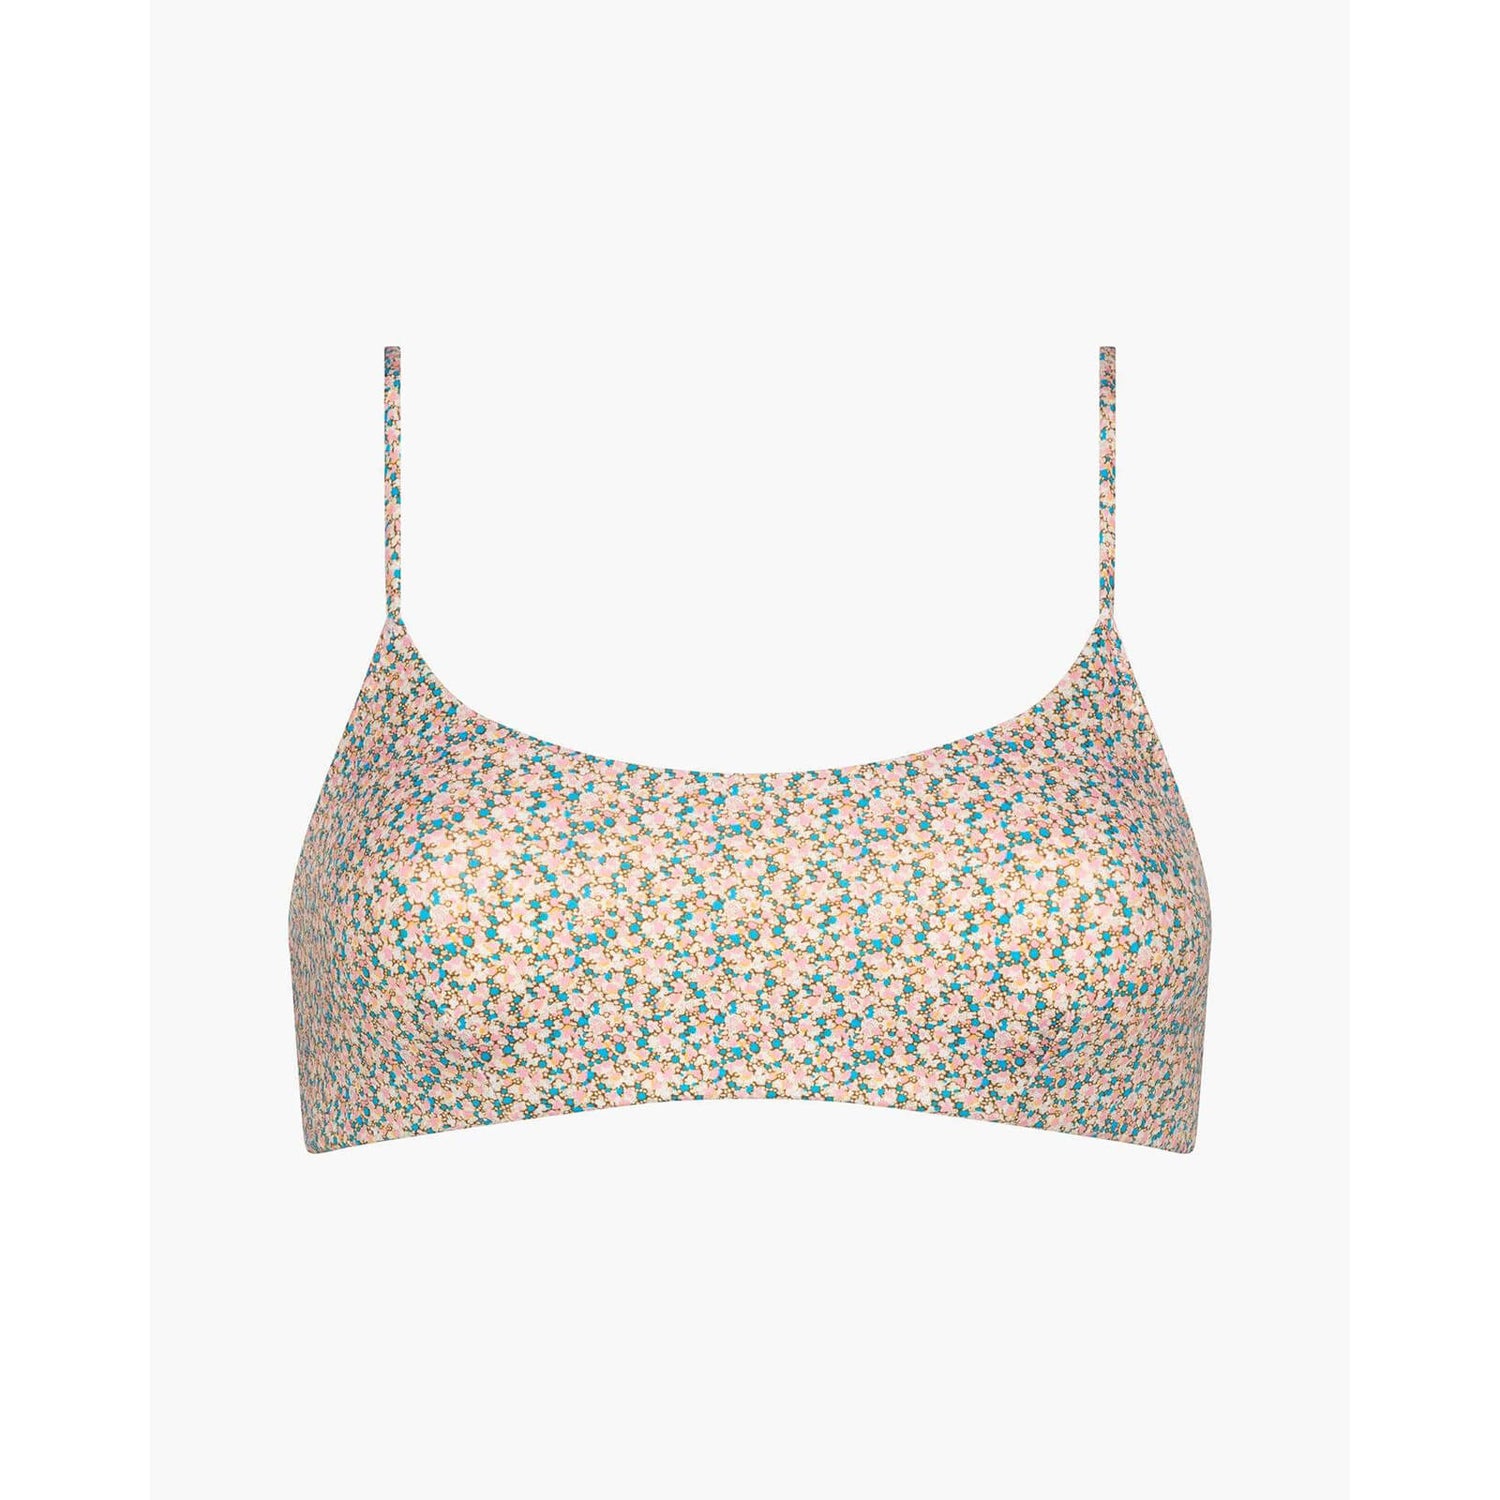 Les Girls Les Boys Bikini Crop Top Made With Dizzy Floral Liberty Fabric - Dizzy Floral - S